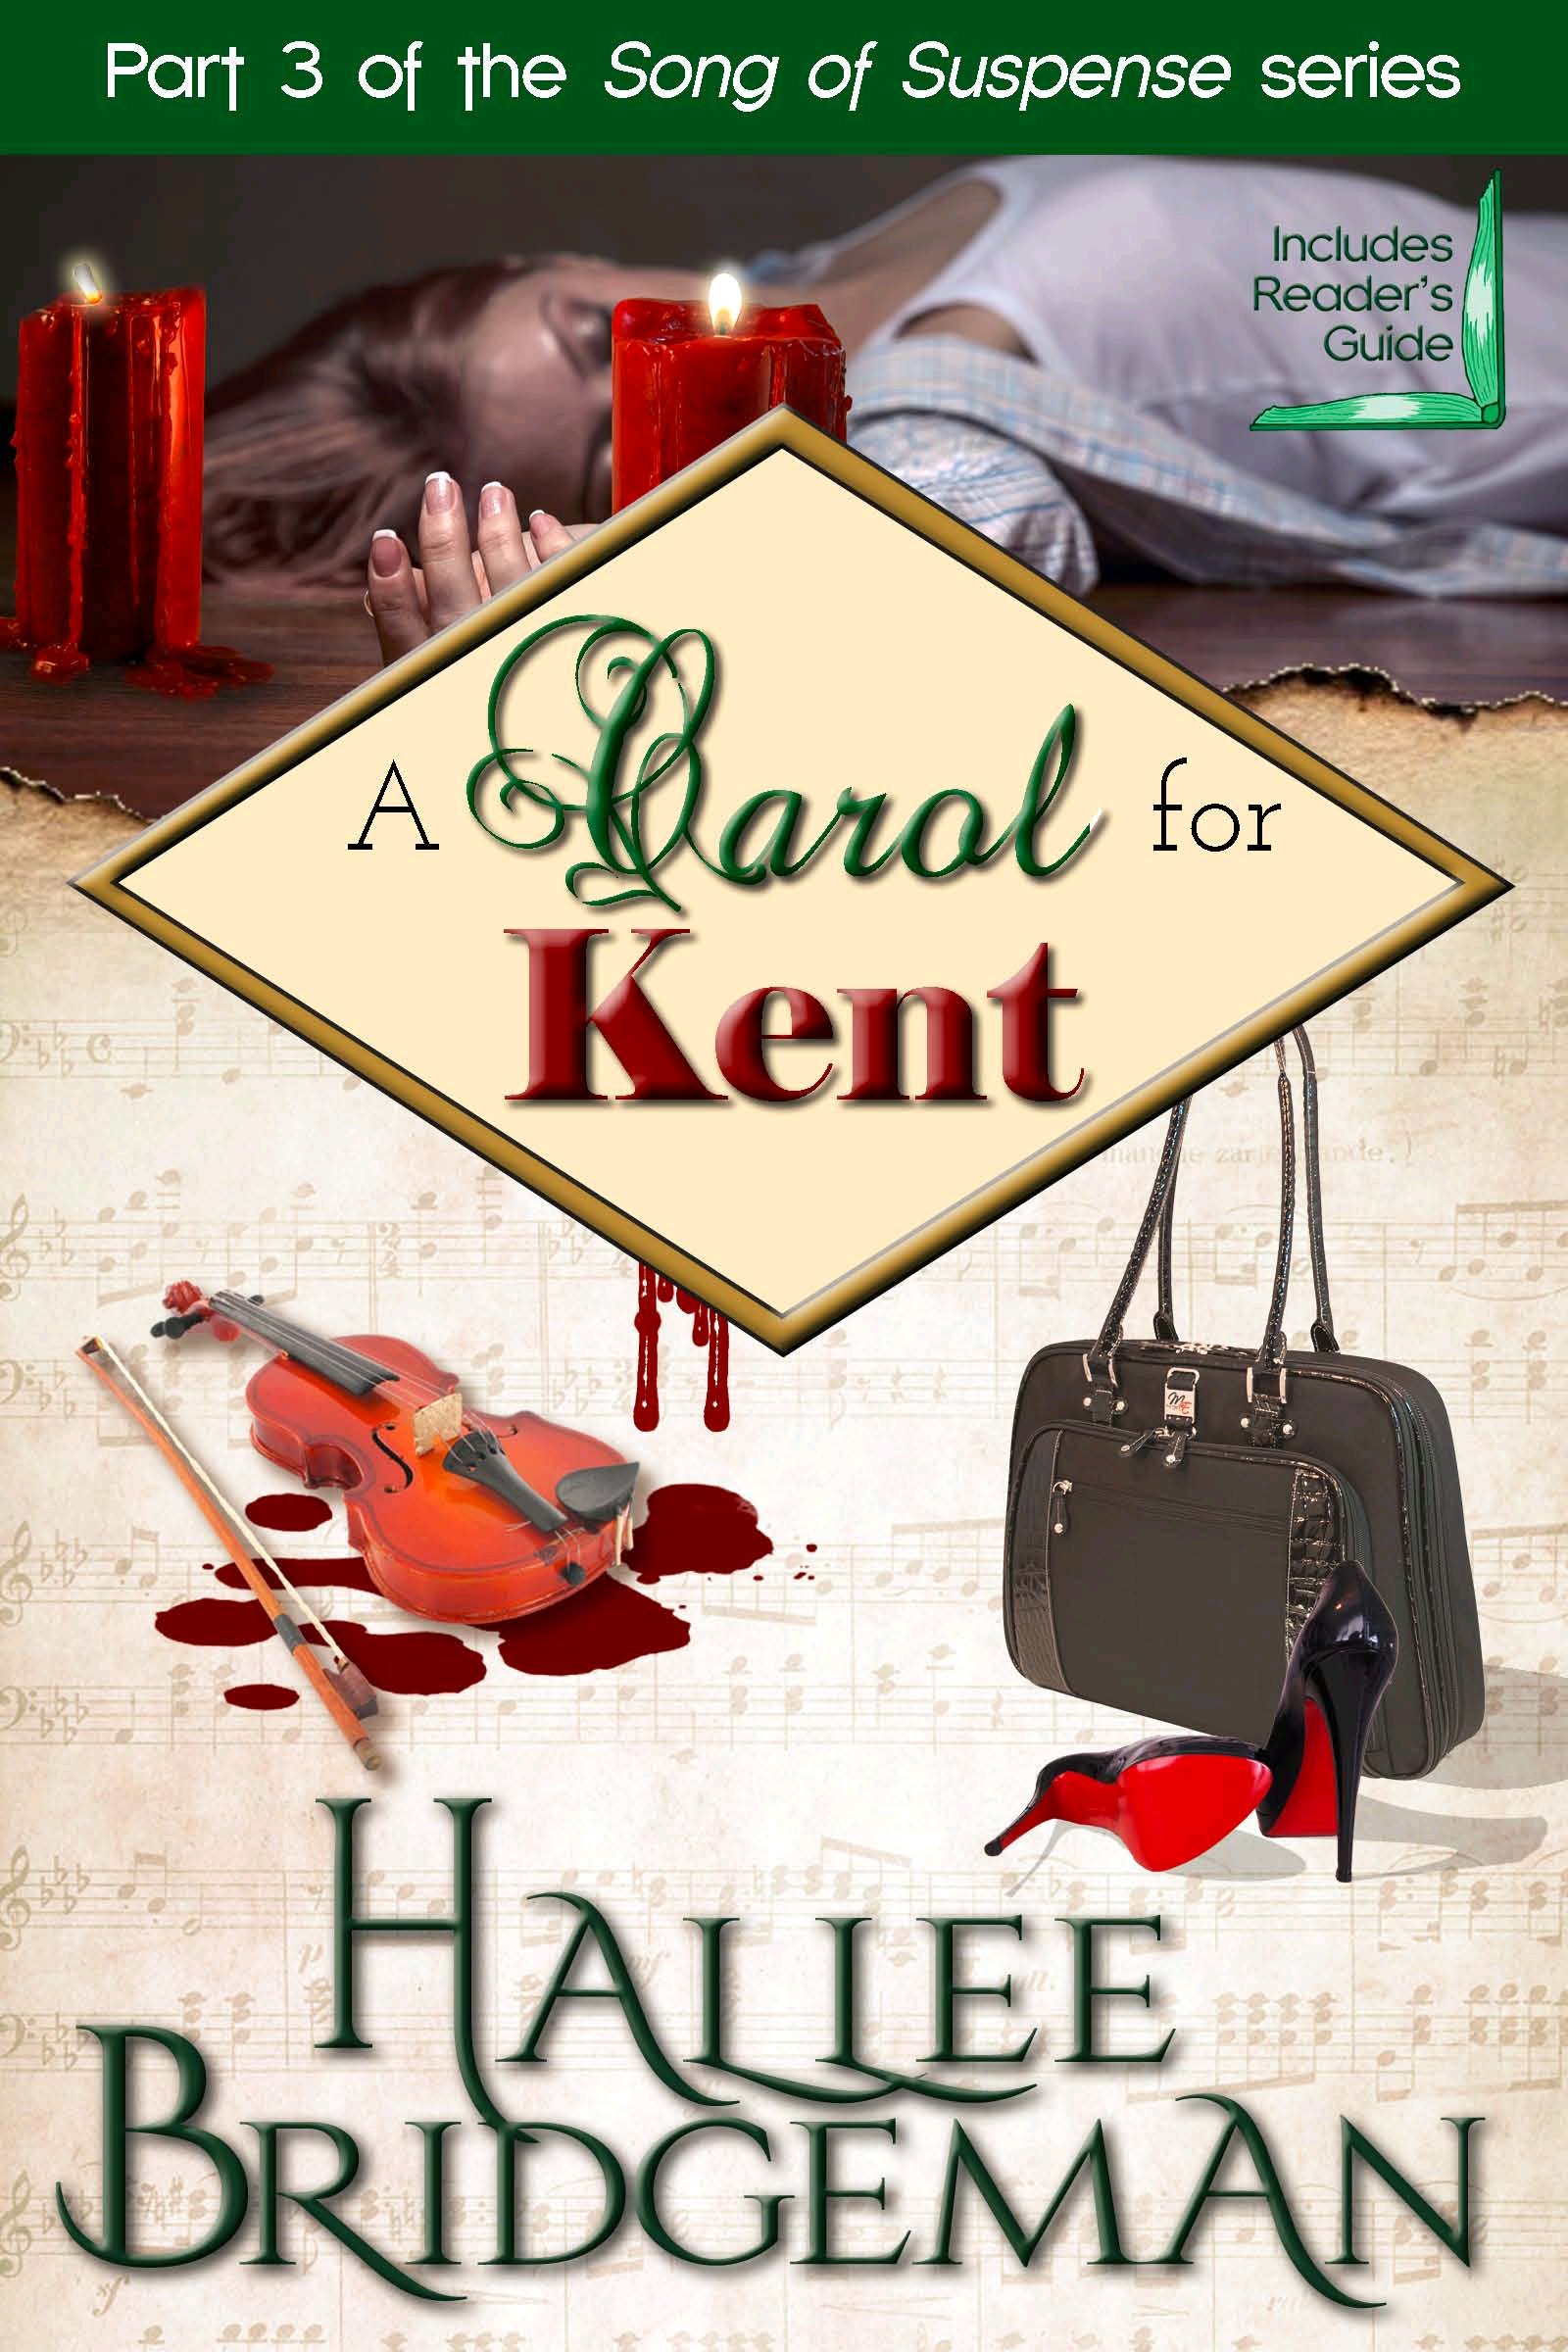 A Carol for Kent is NOW AVAILABLE!!”